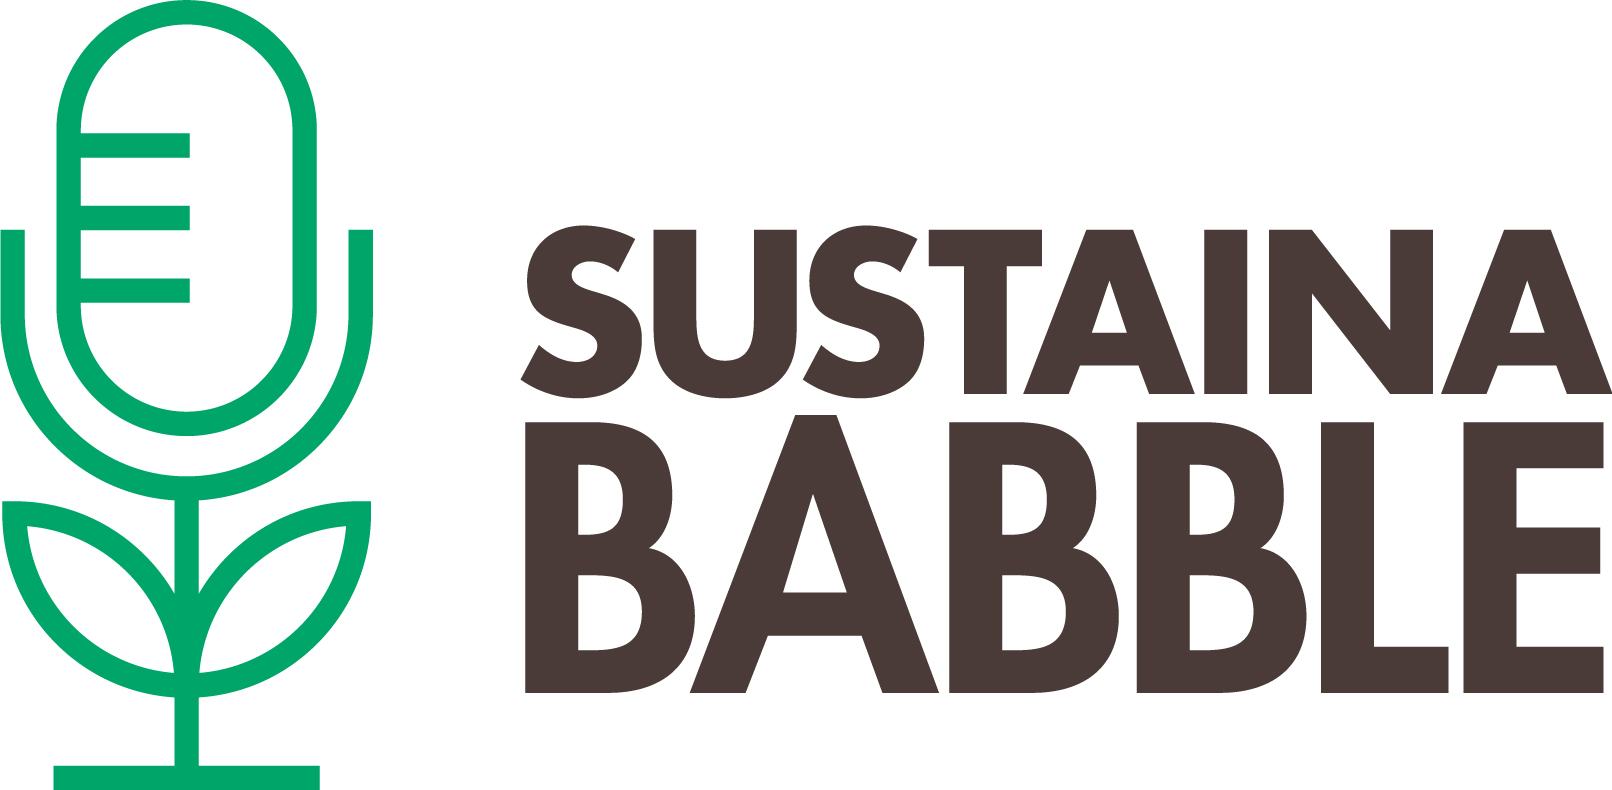 Sustainababble